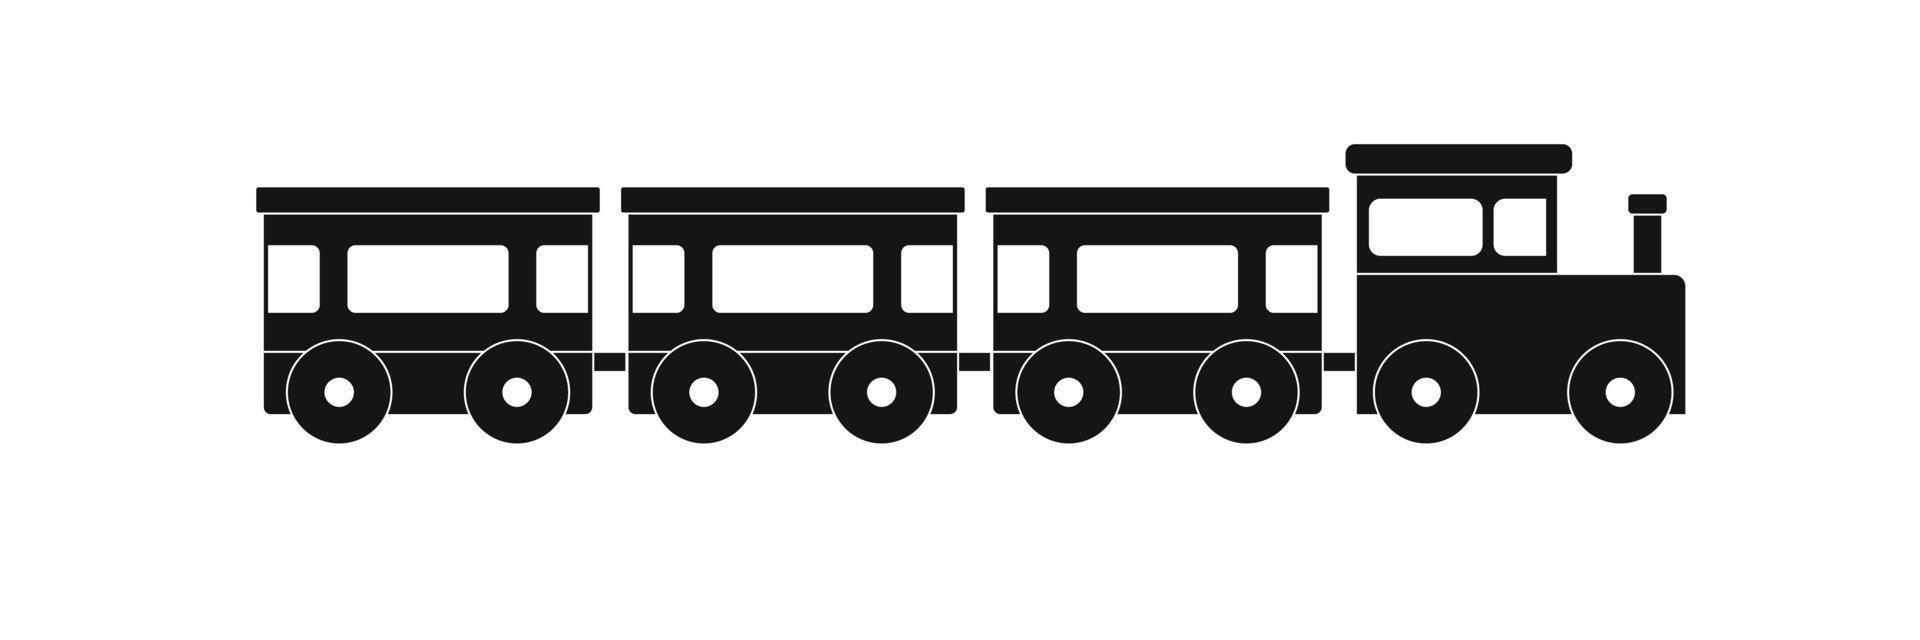 Express train icon, simple style. vector